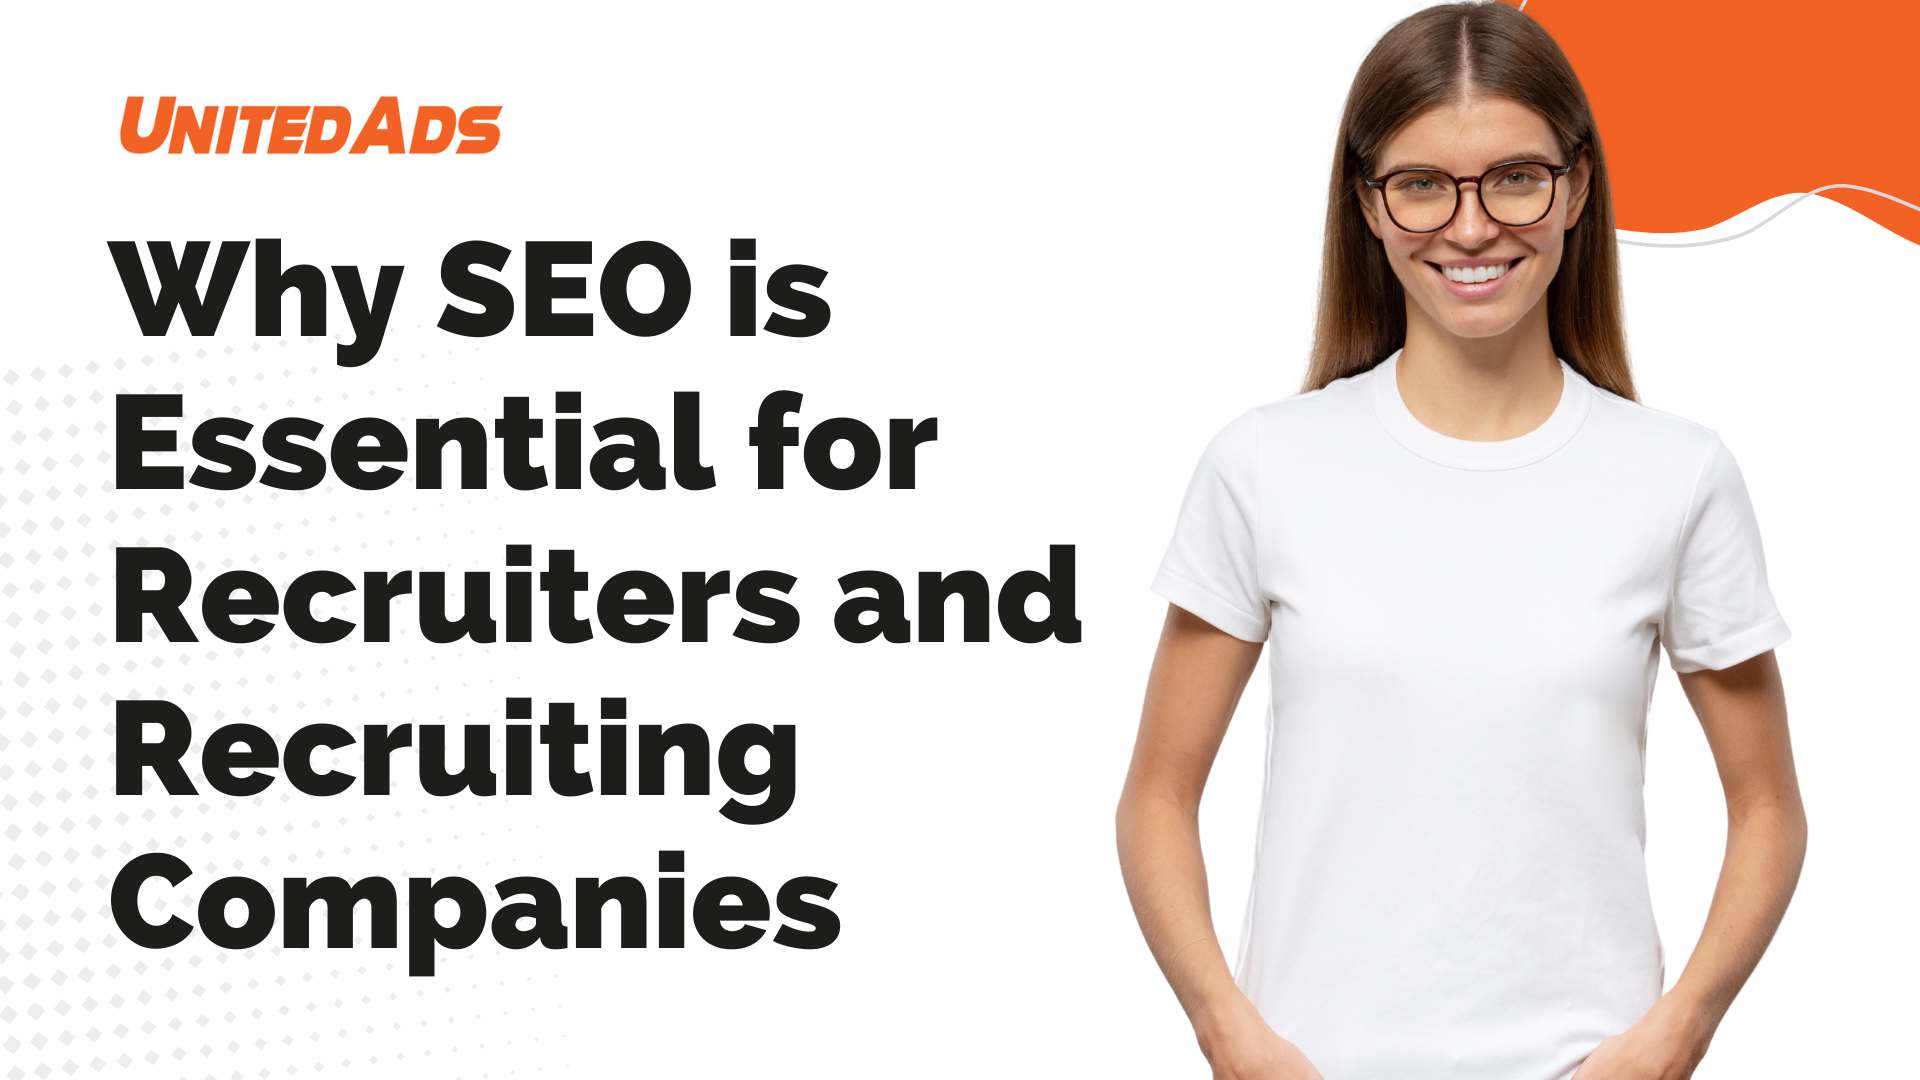 Why SEO is Essential for Recruiters and Recruiting Companies